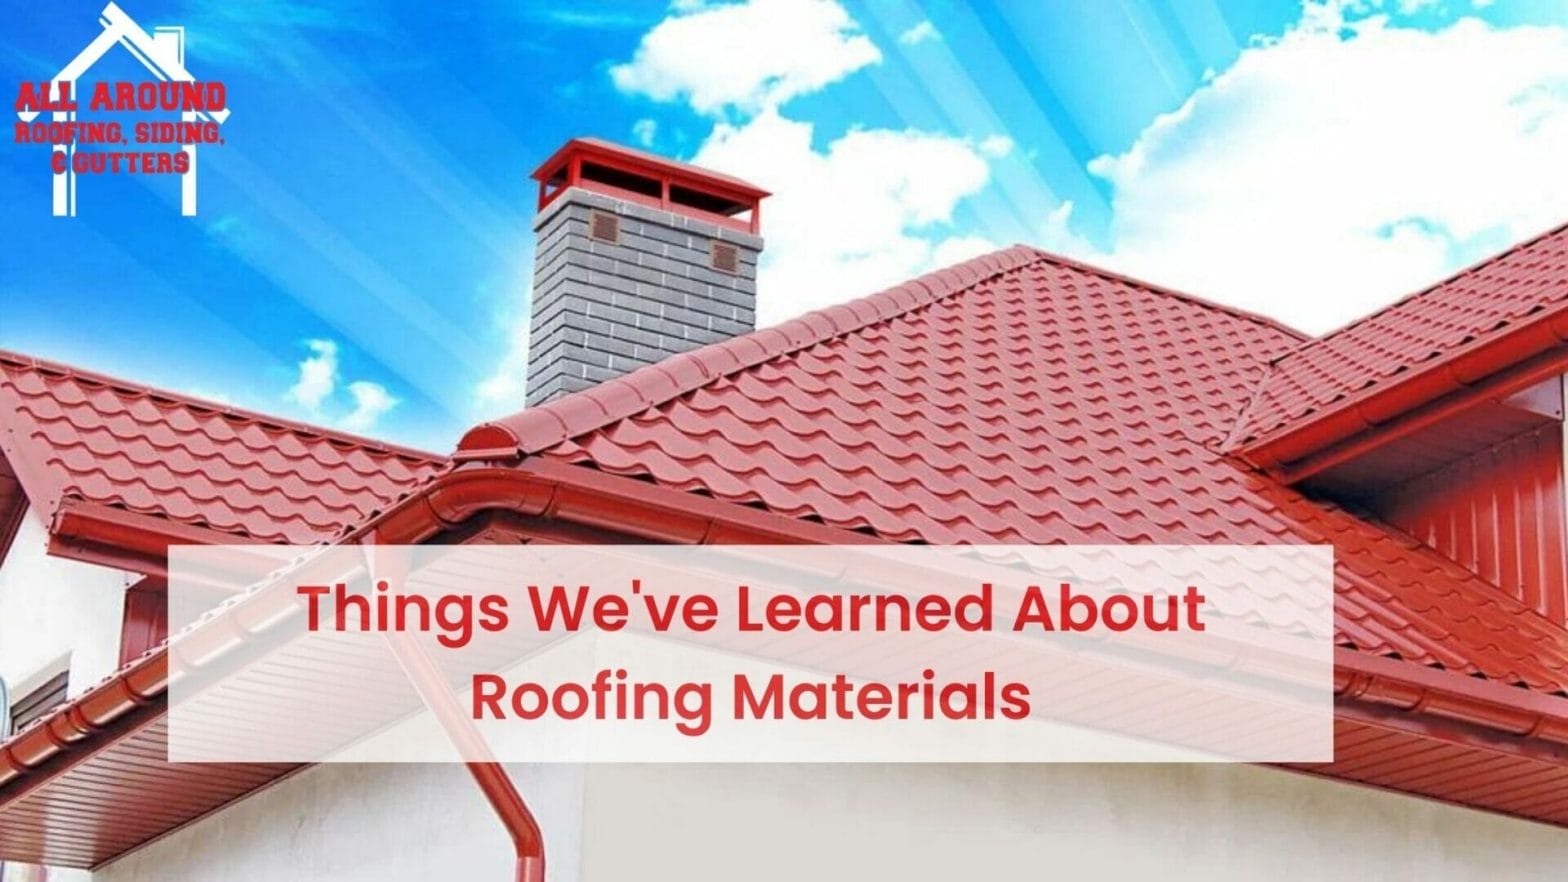 10 Things We’ve Learned About Roofing Materials